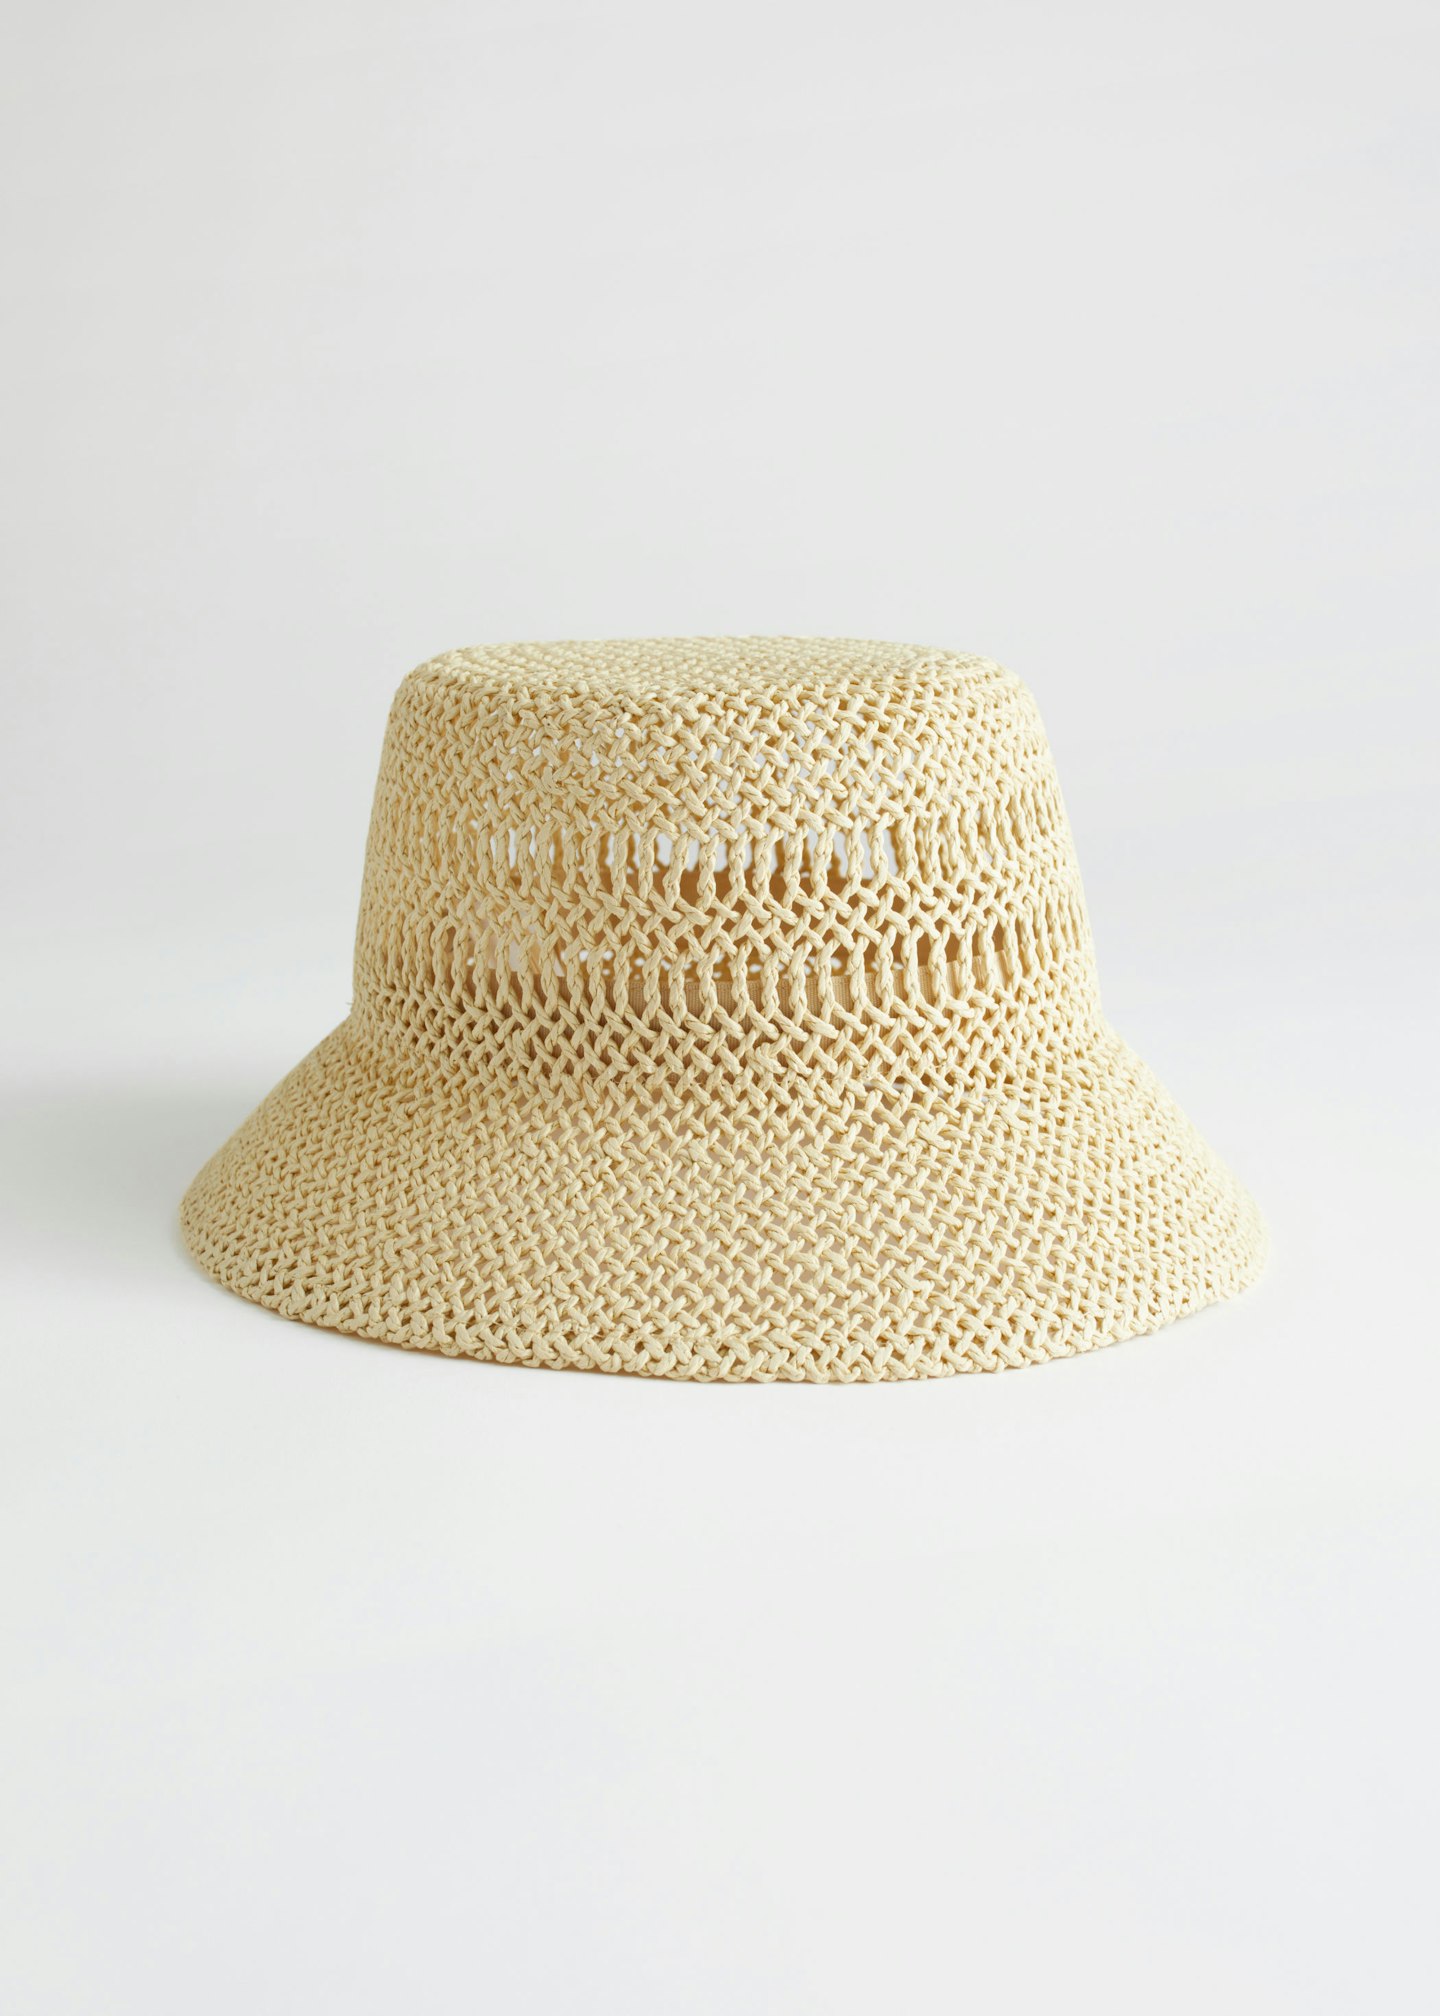 & Other Stories, Woven Straw Bucket Hat, £27